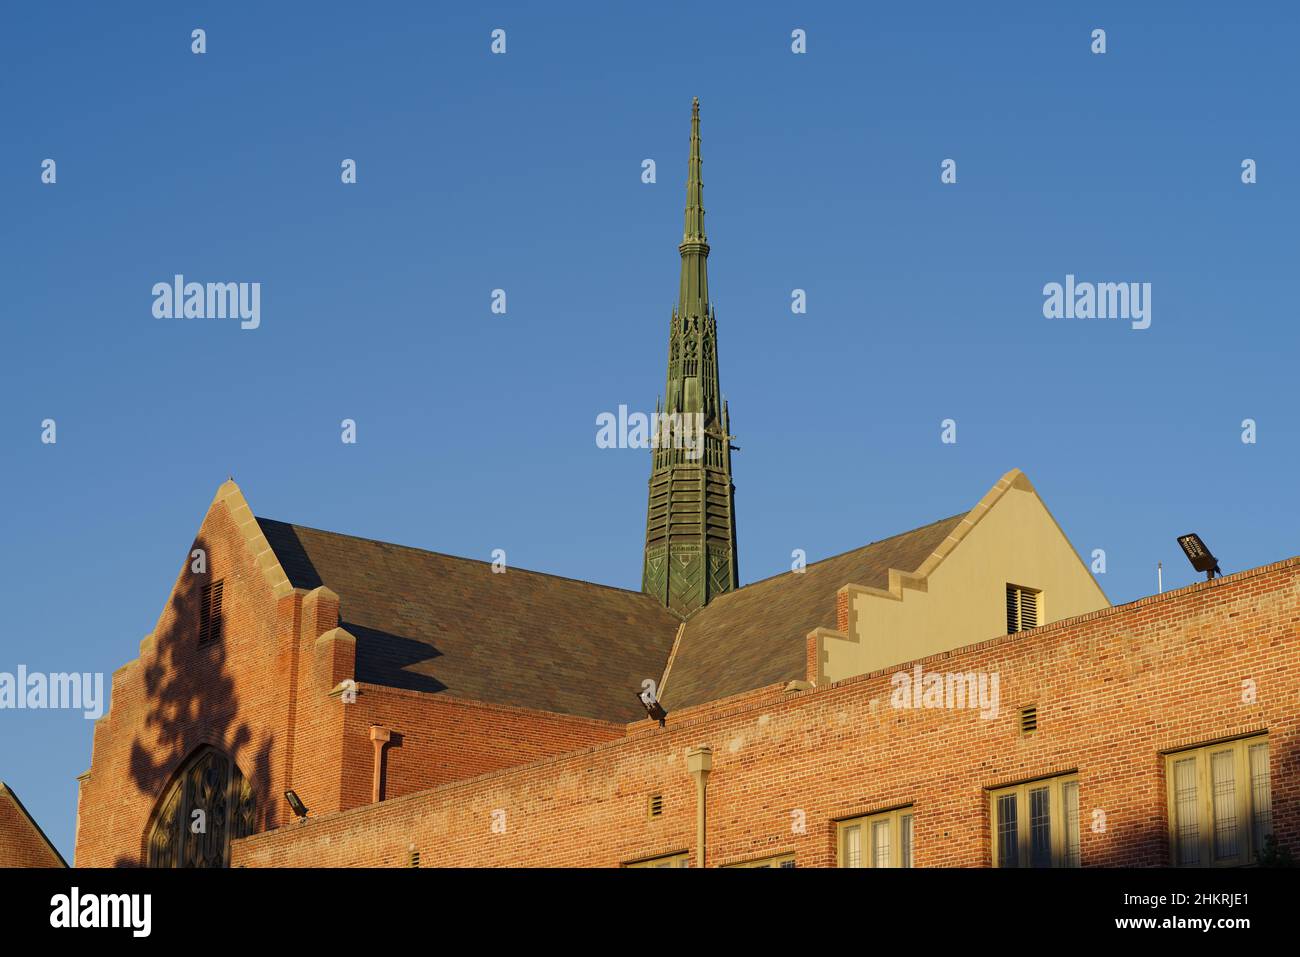 Rooftop and steeple of the First United Methodist Church against a blue, afternoon sky. Stock Photo